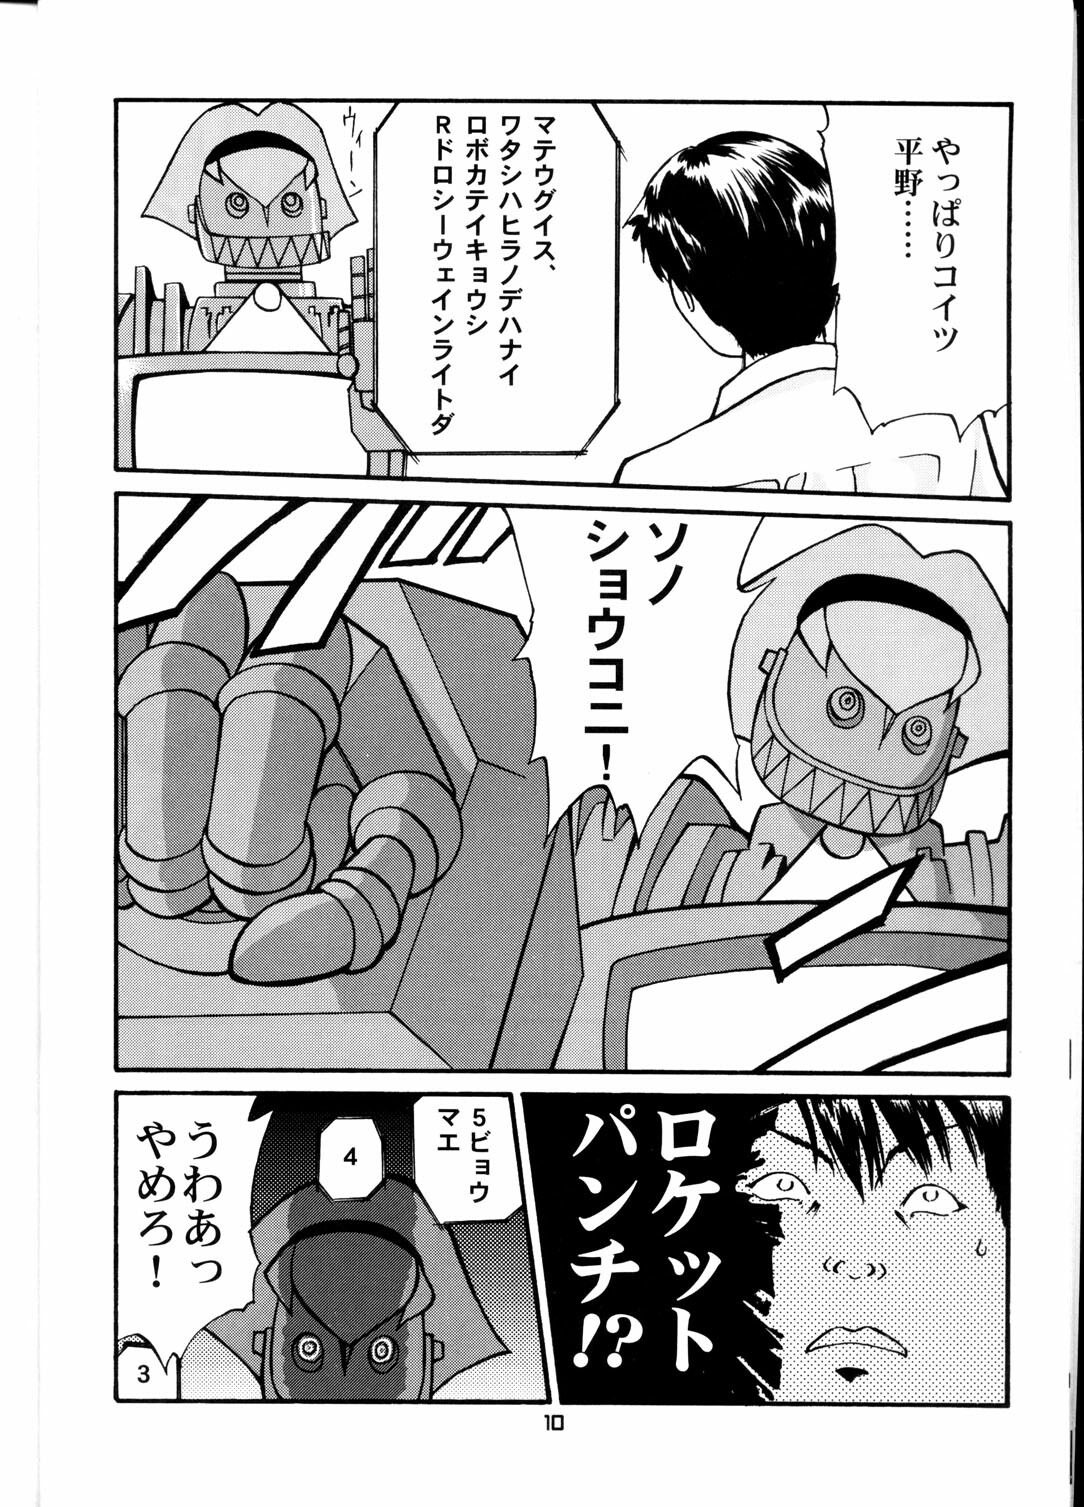 (C58) [T2 UNIT (Various)] OH! Robo Musume Chuushuugou! (Various) page 10 full